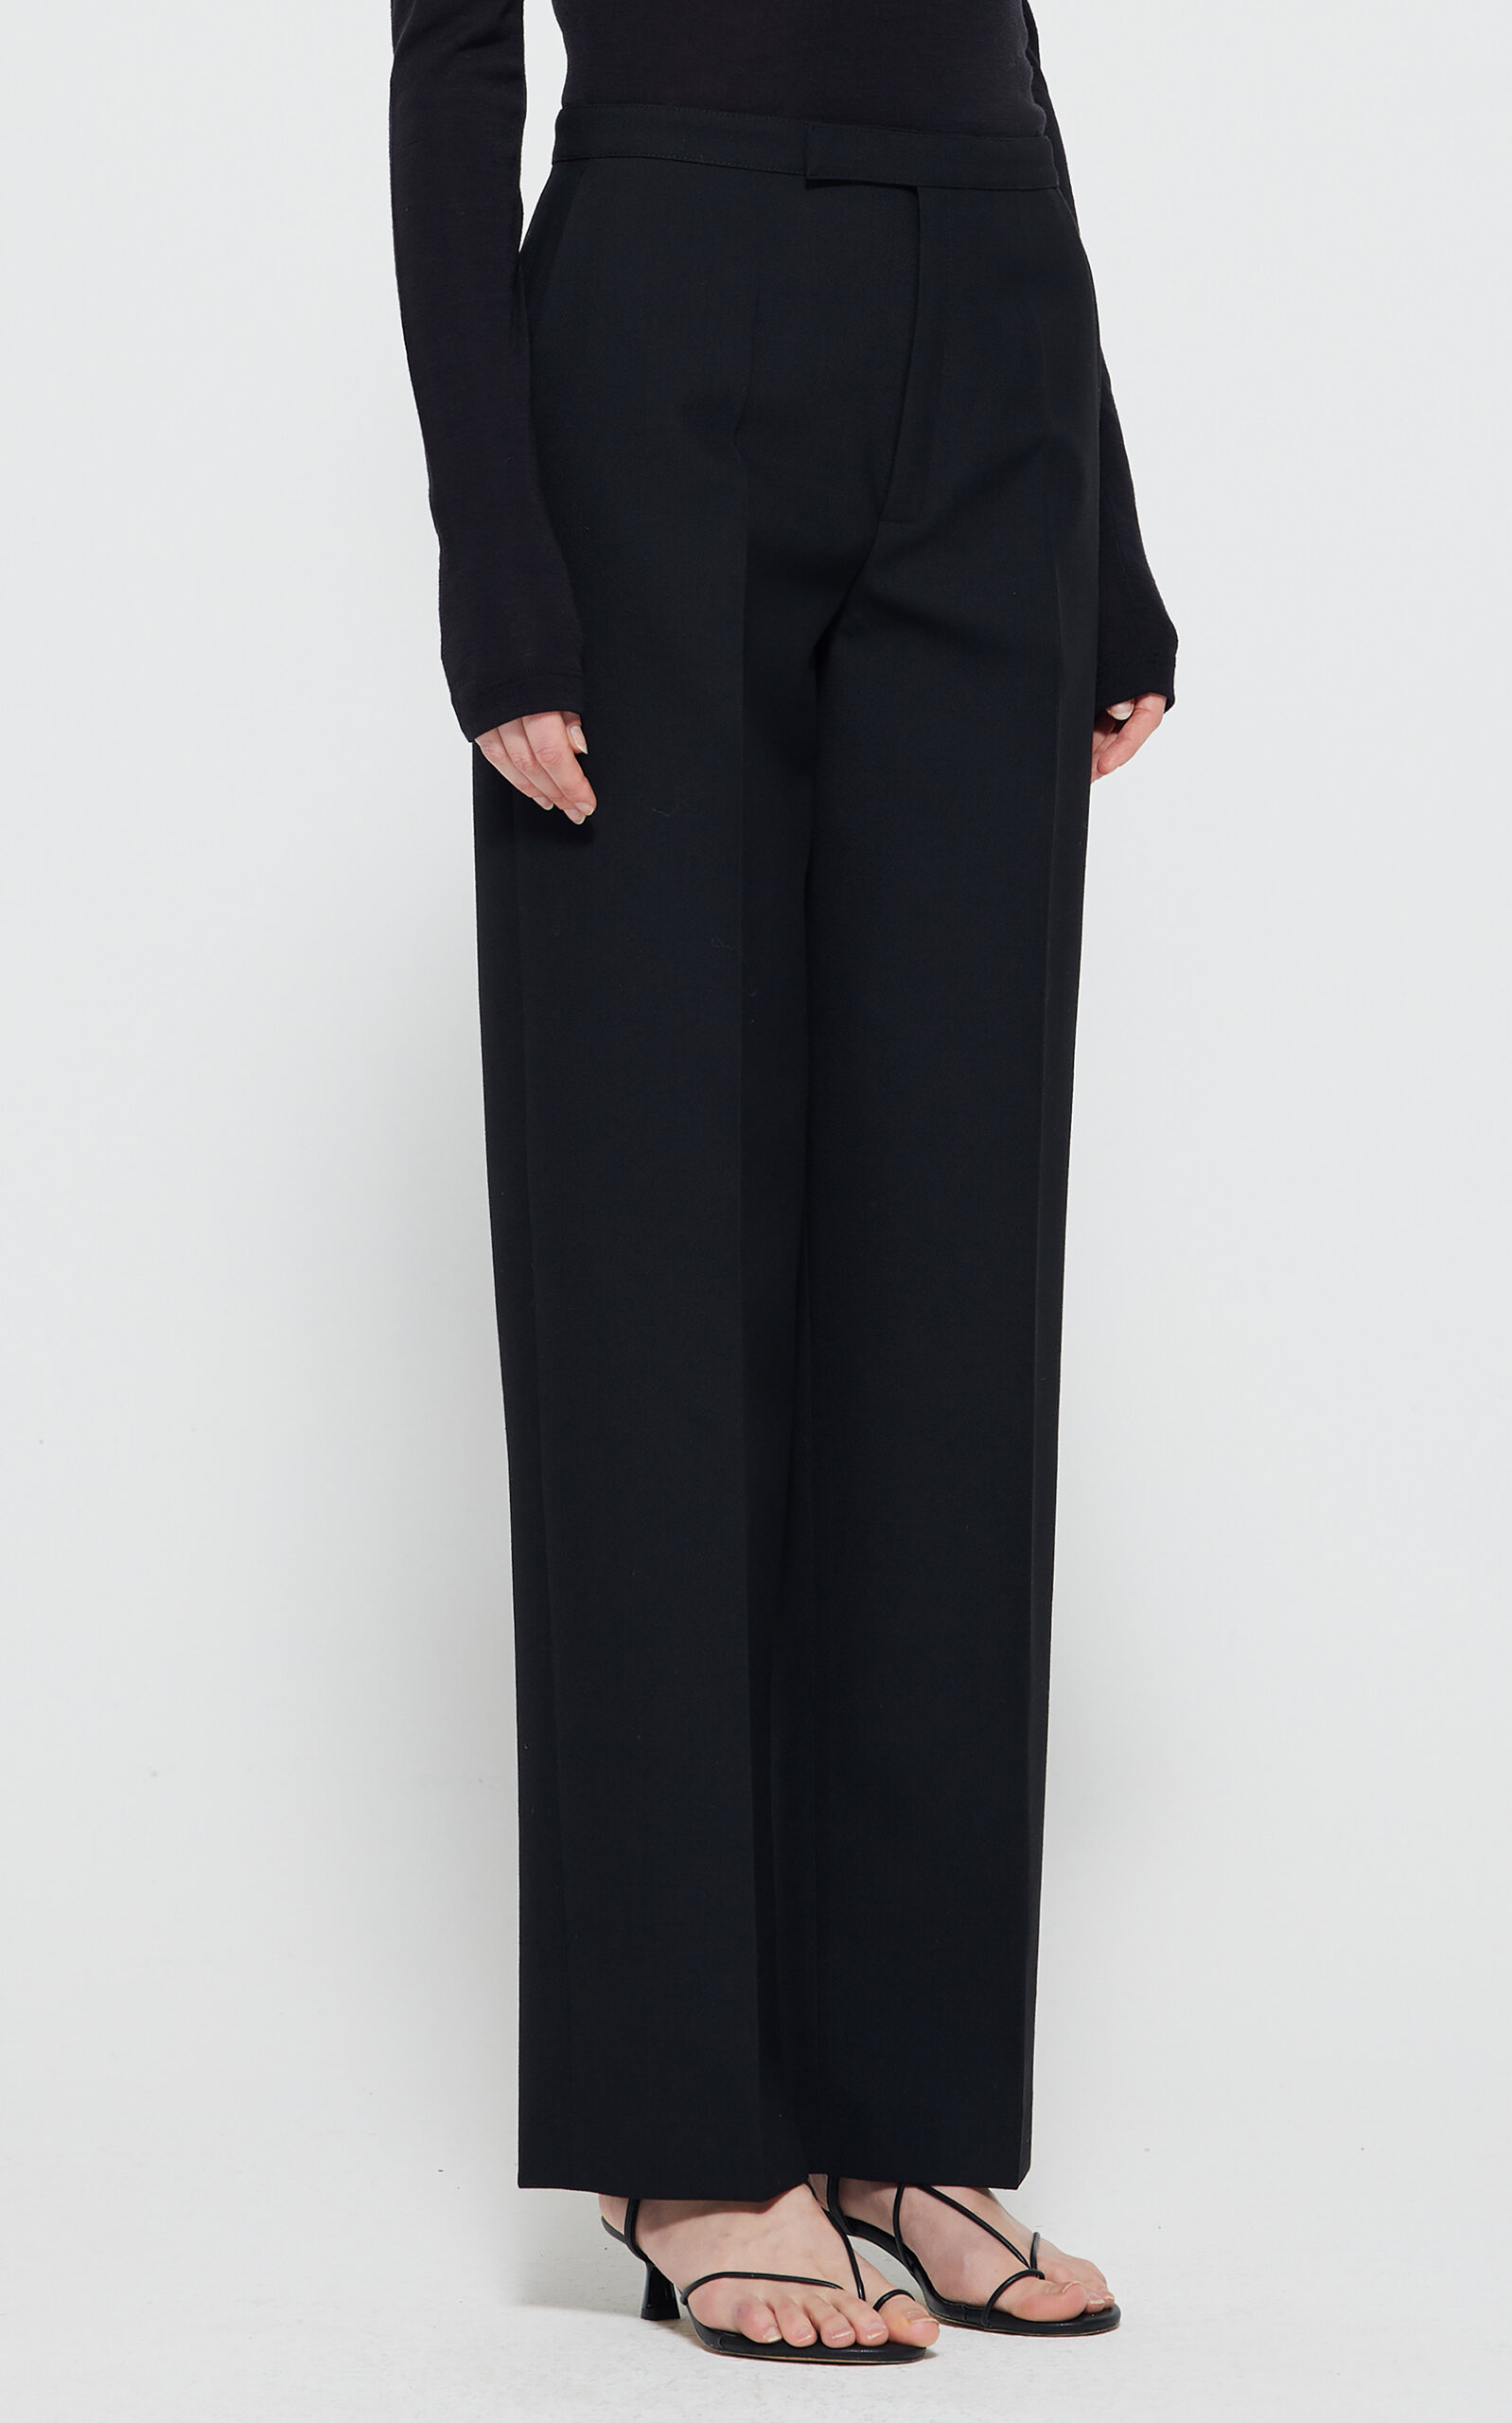 Rohe Women's Tailored Pants In Black